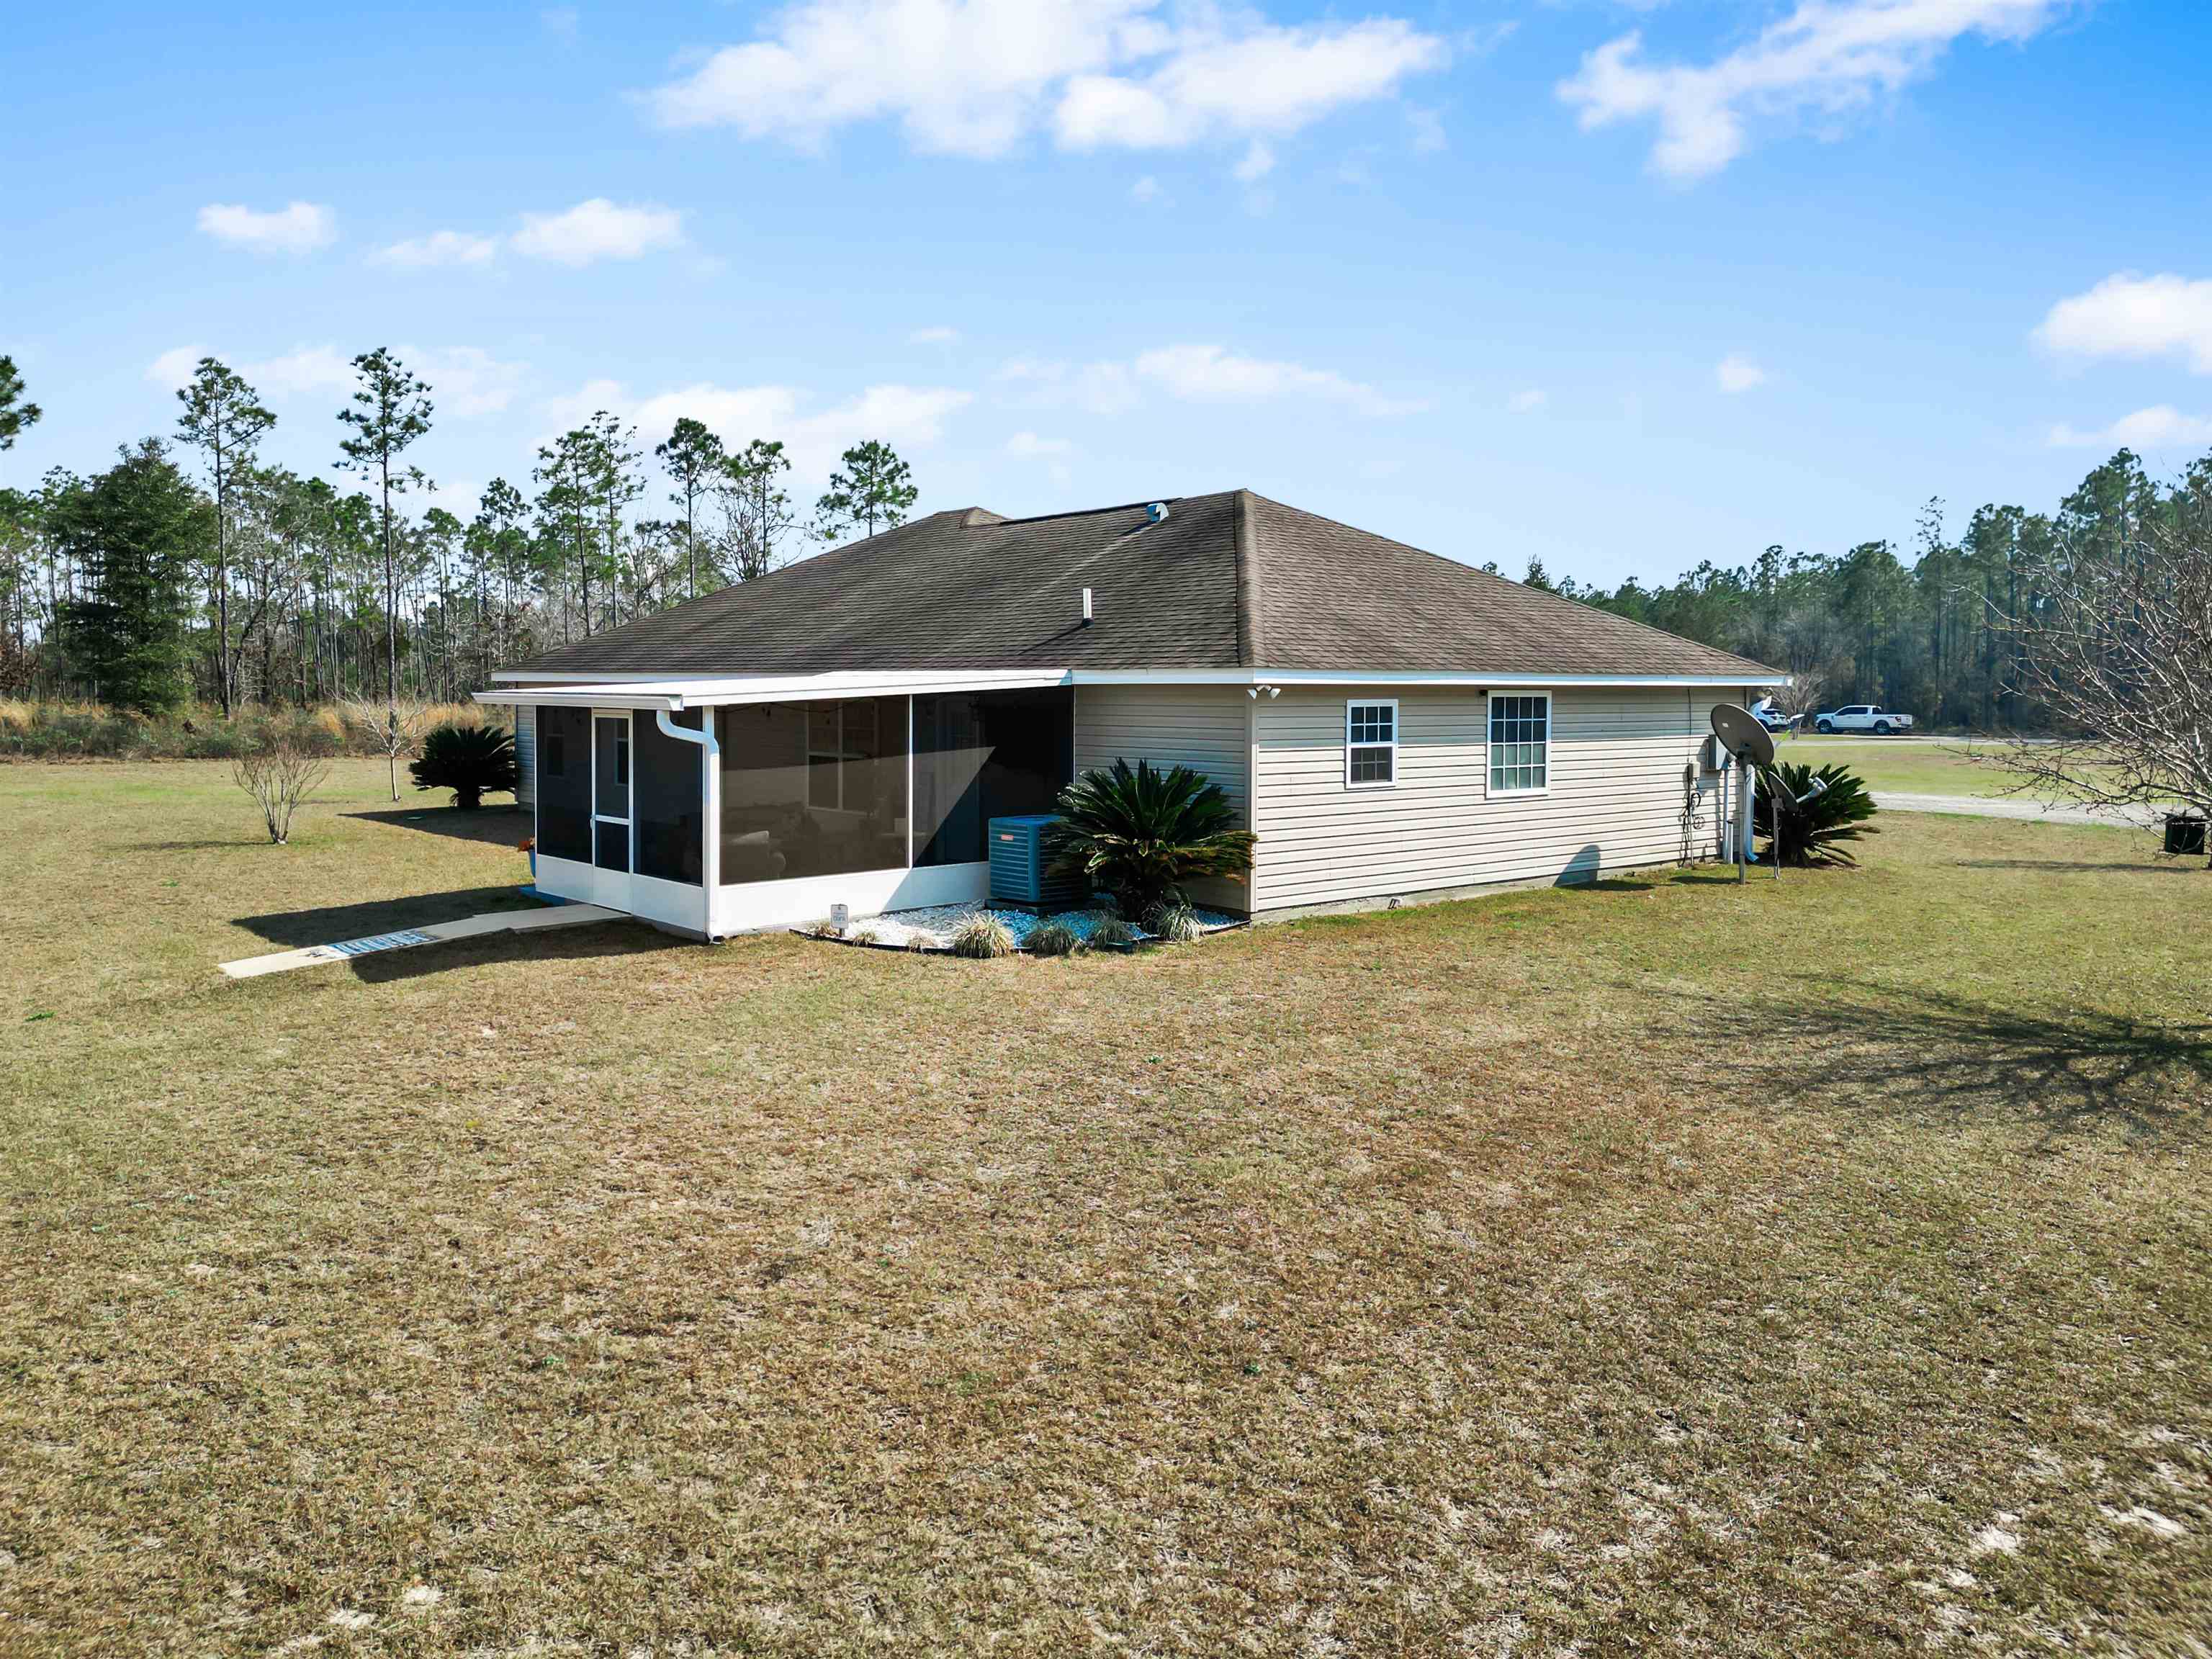 15088 NW L And H Road,BRISTOL,Florida 32321,4 Bedrooms Bedrooms,2 BathroomsBathrooms,Detached single family,15088 NW L And H Road,368916